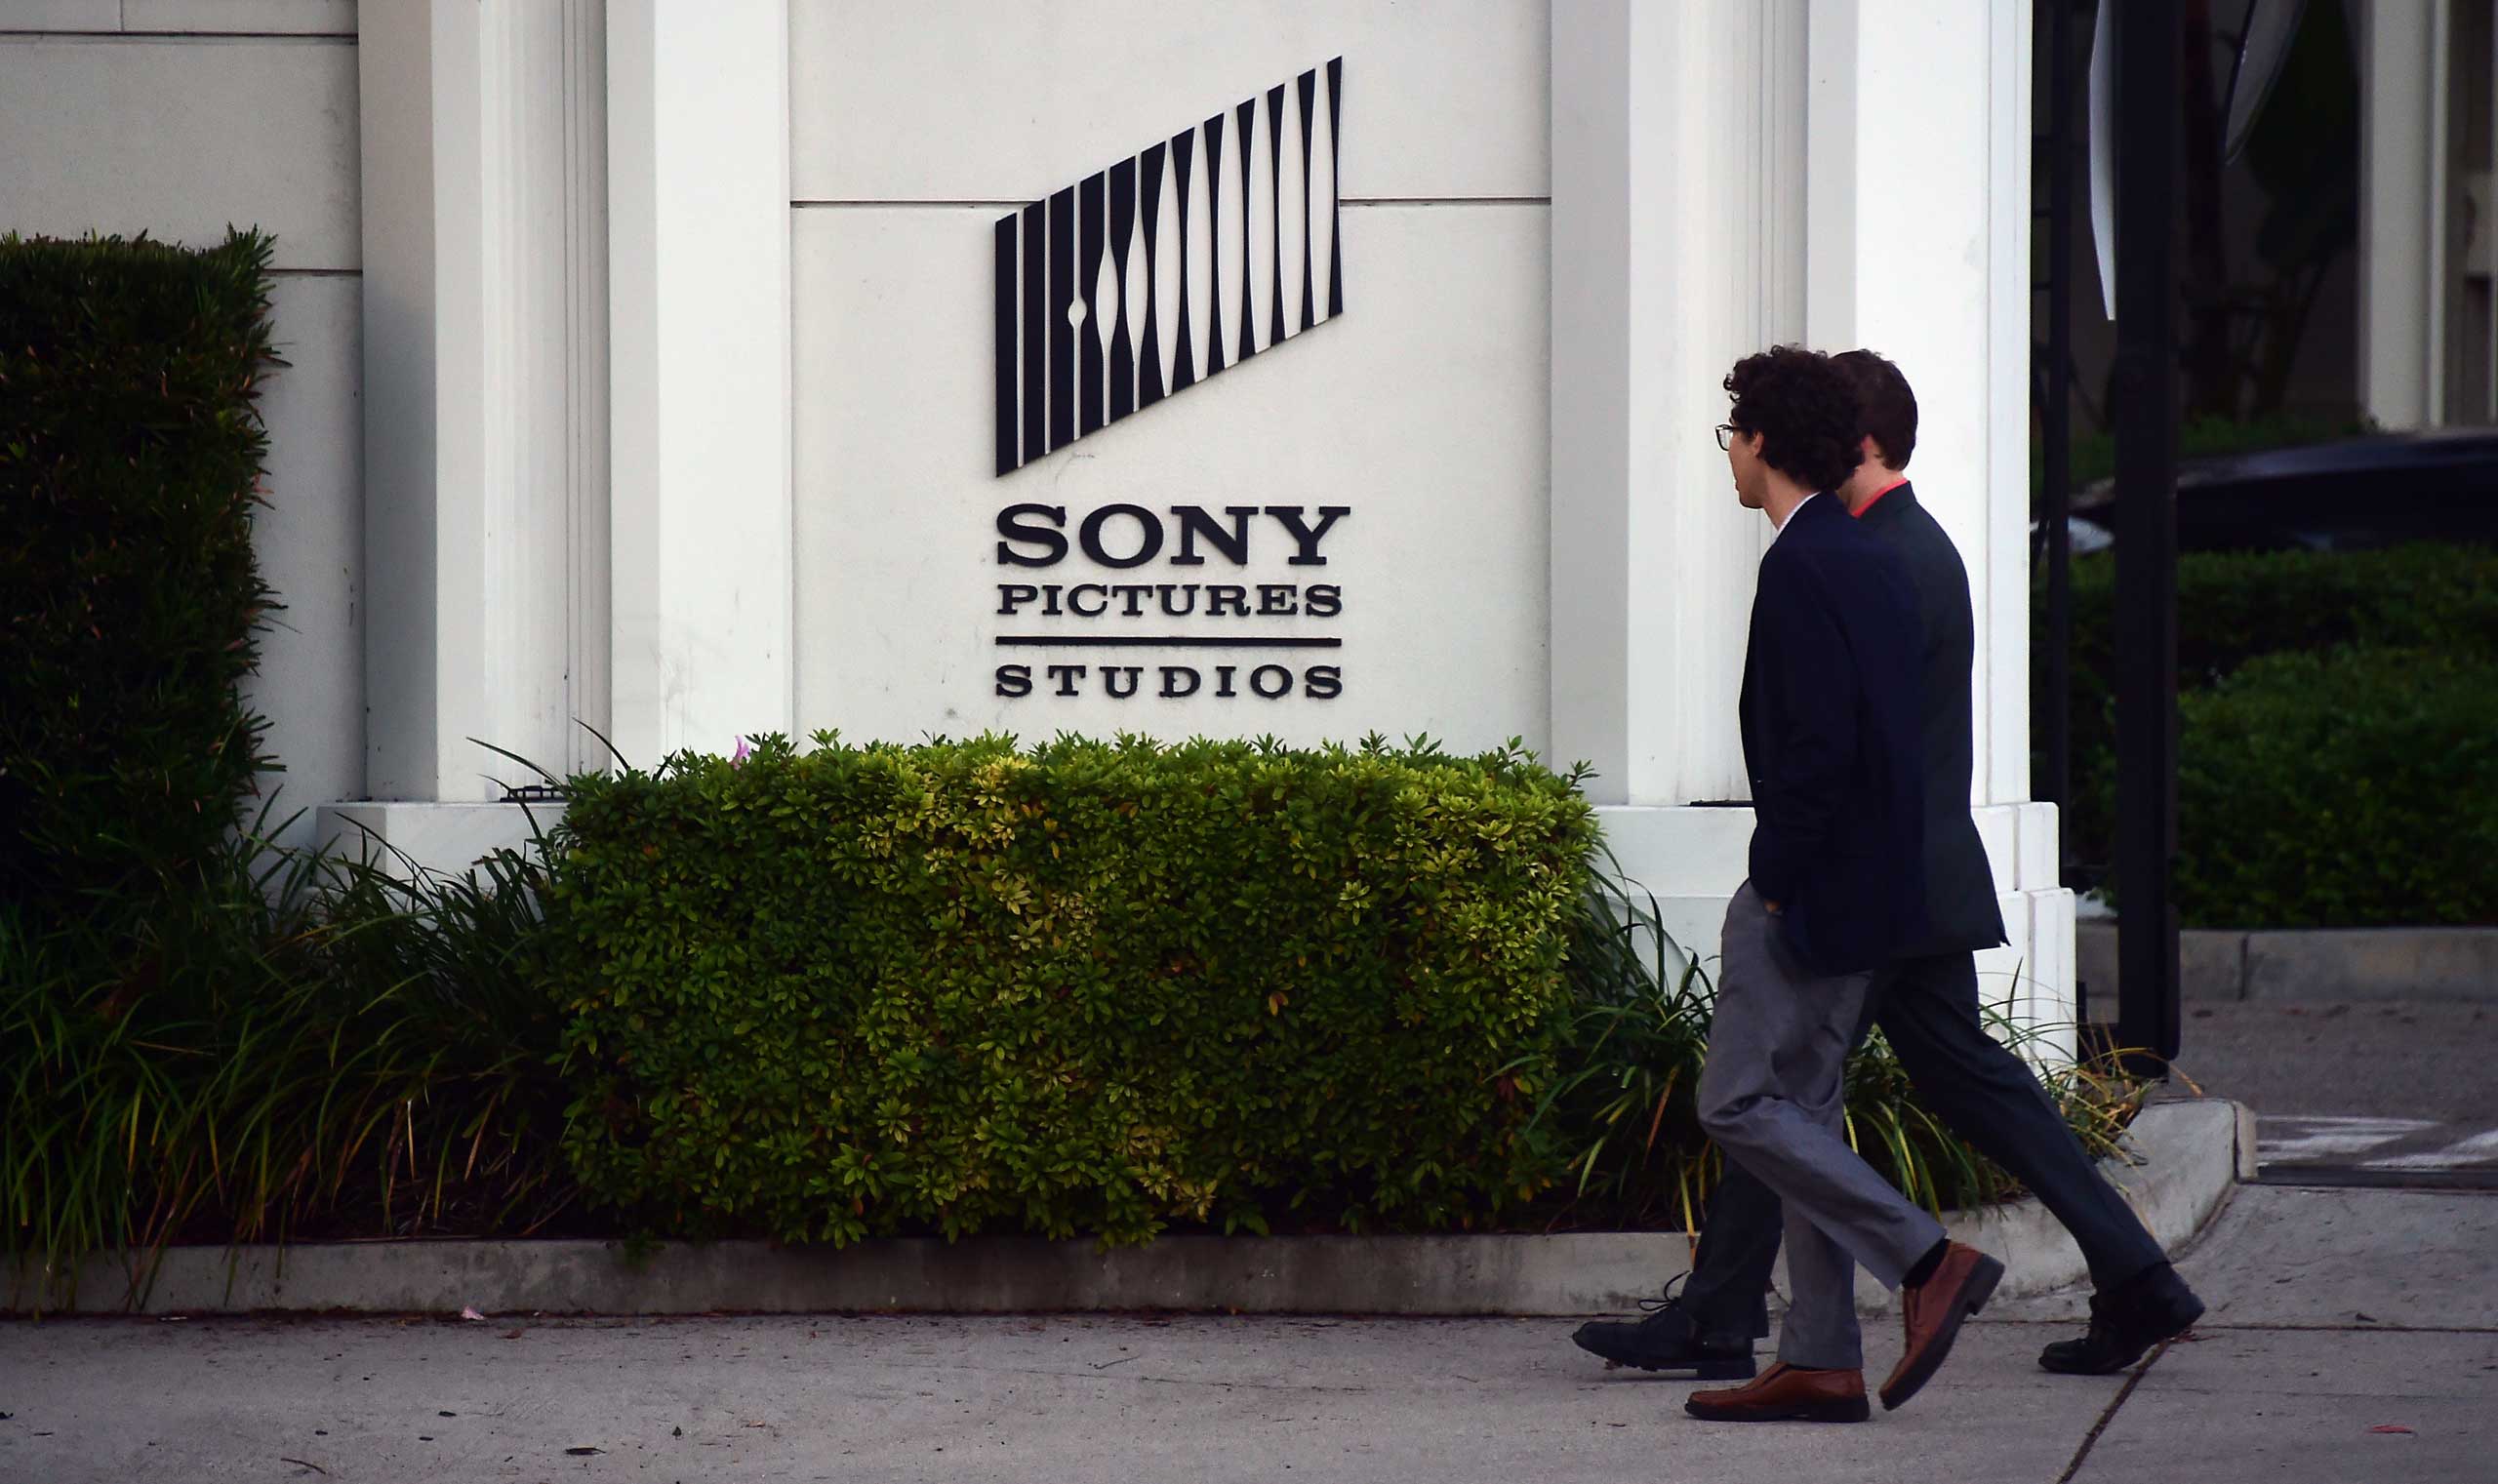 Pedestrians walk past an exterior wall to Sony Pictures Studios in Los Angeles on Dec. 4, 2014. (Frederic J. Brown—AFP/Getty Images)